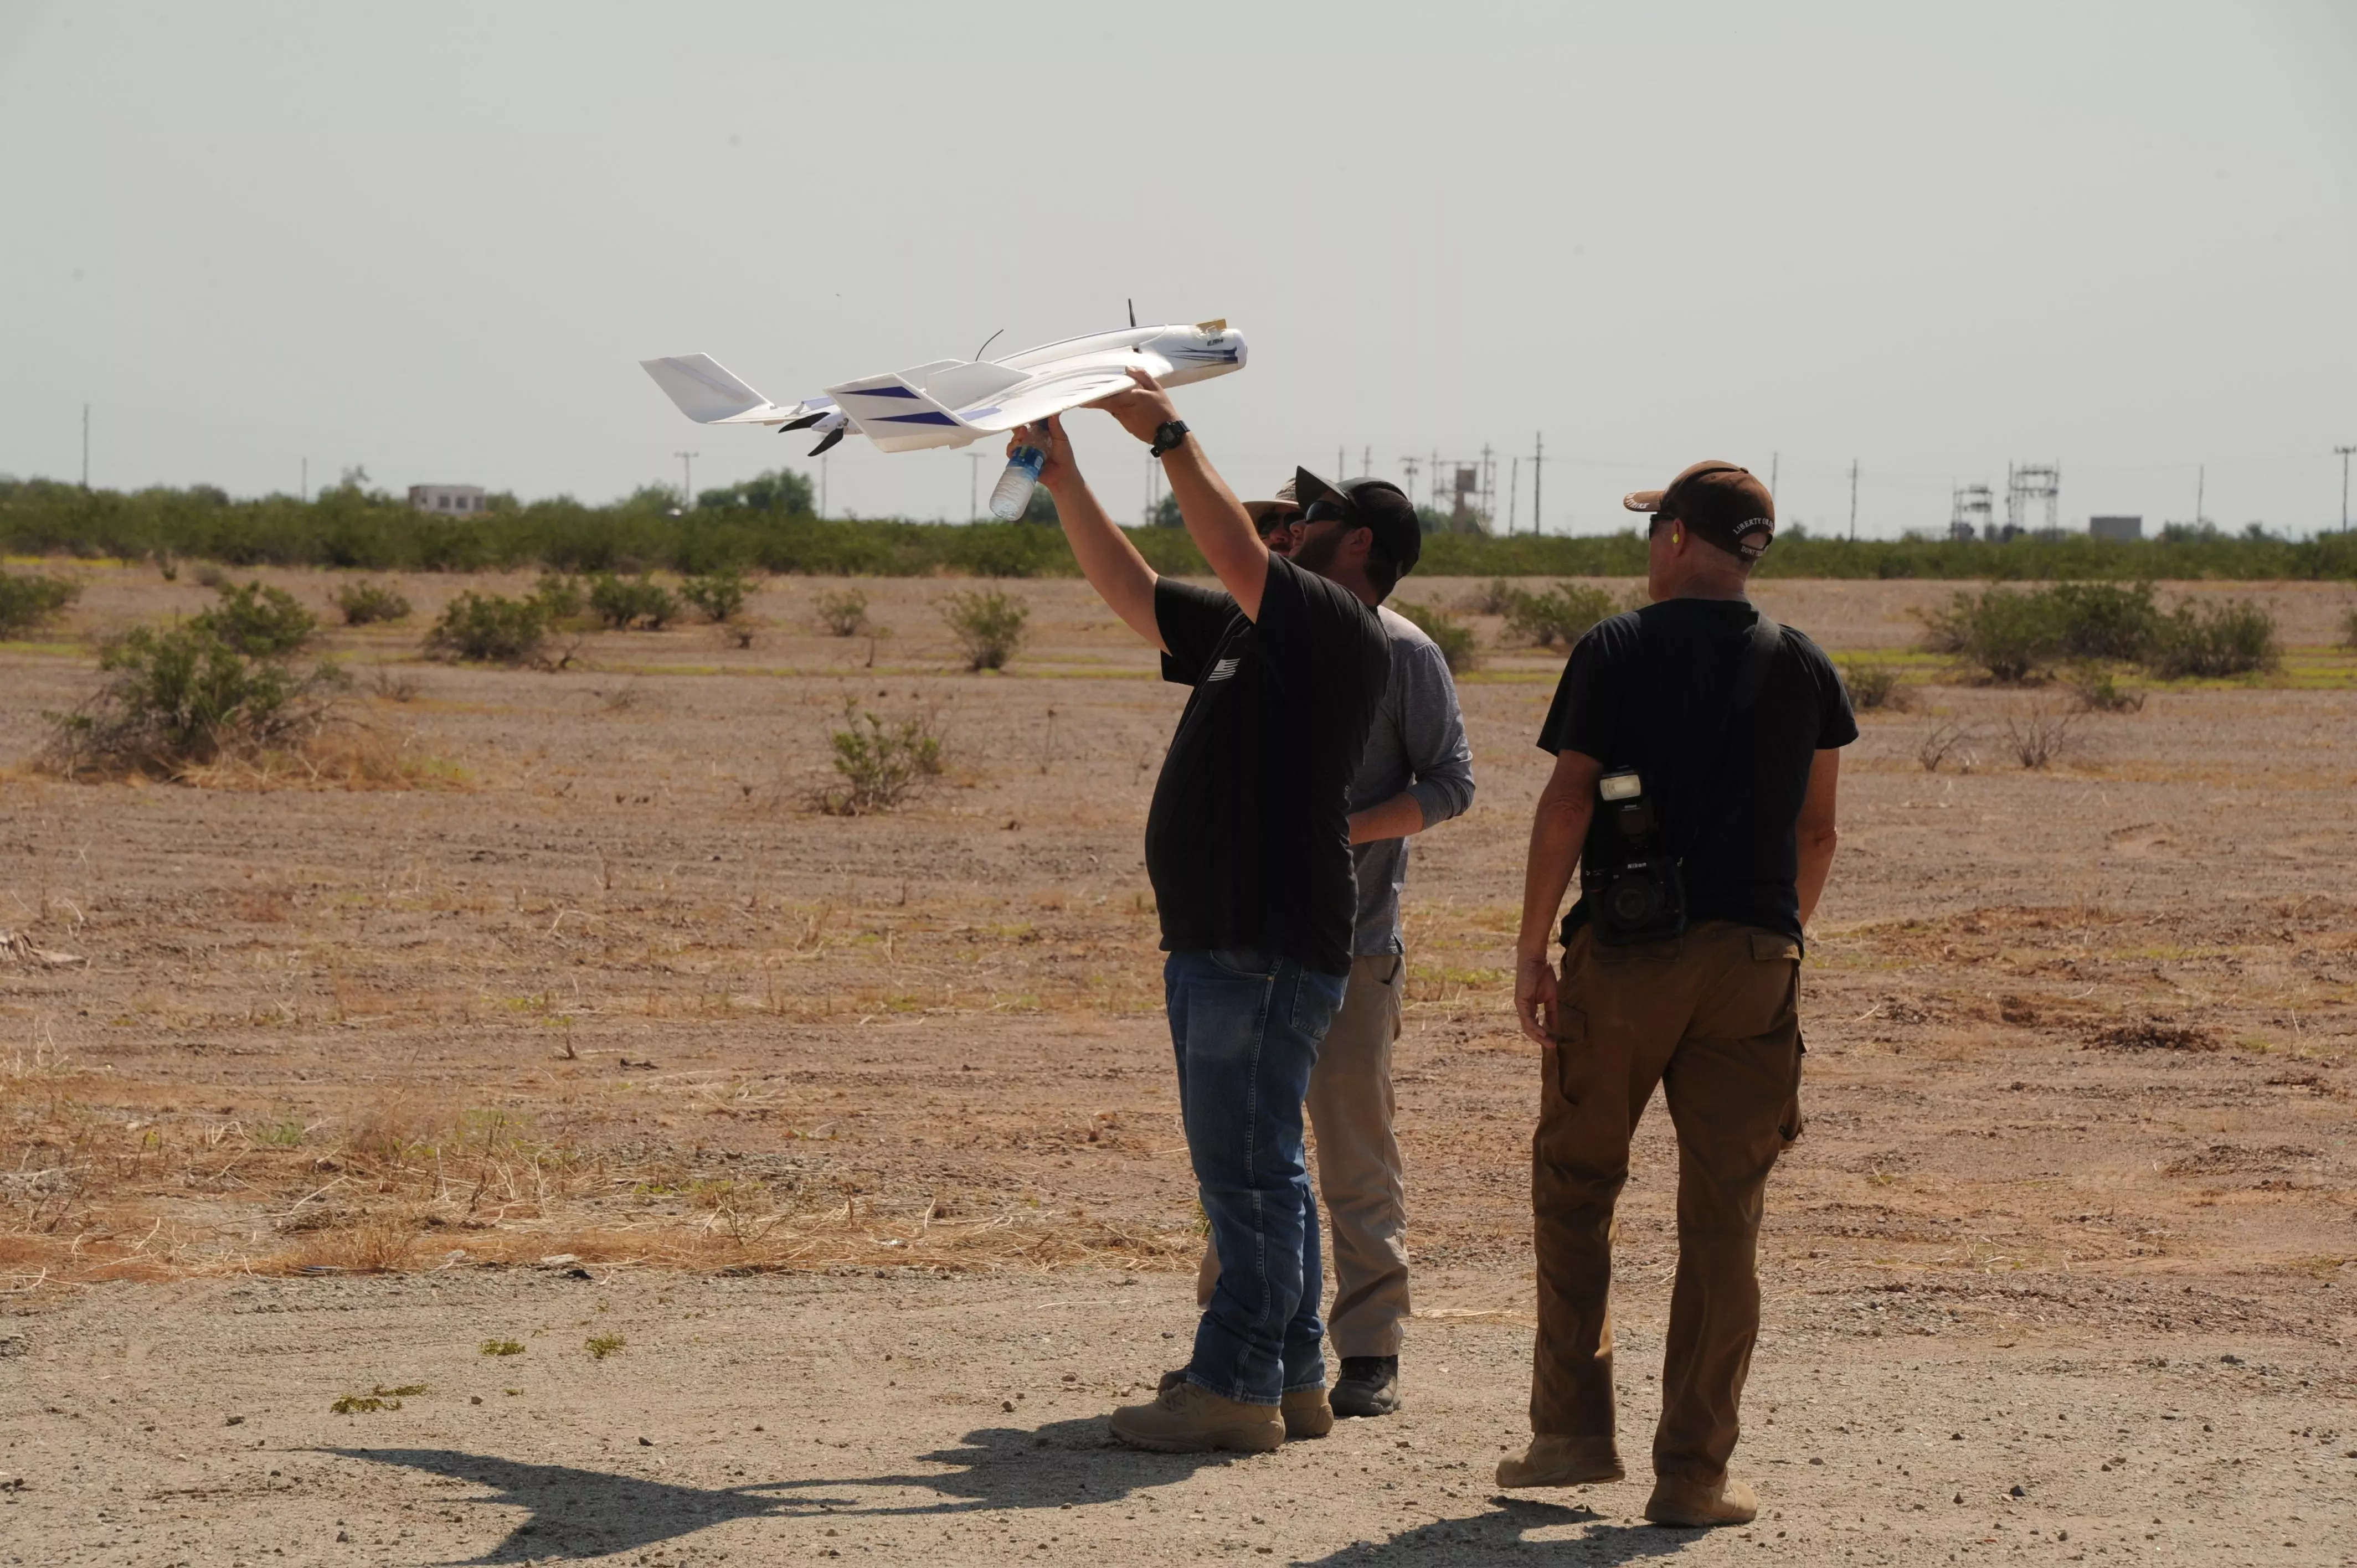 A counter-small unmanned aerial system (C-sUAS) demonstration is held at the US Army